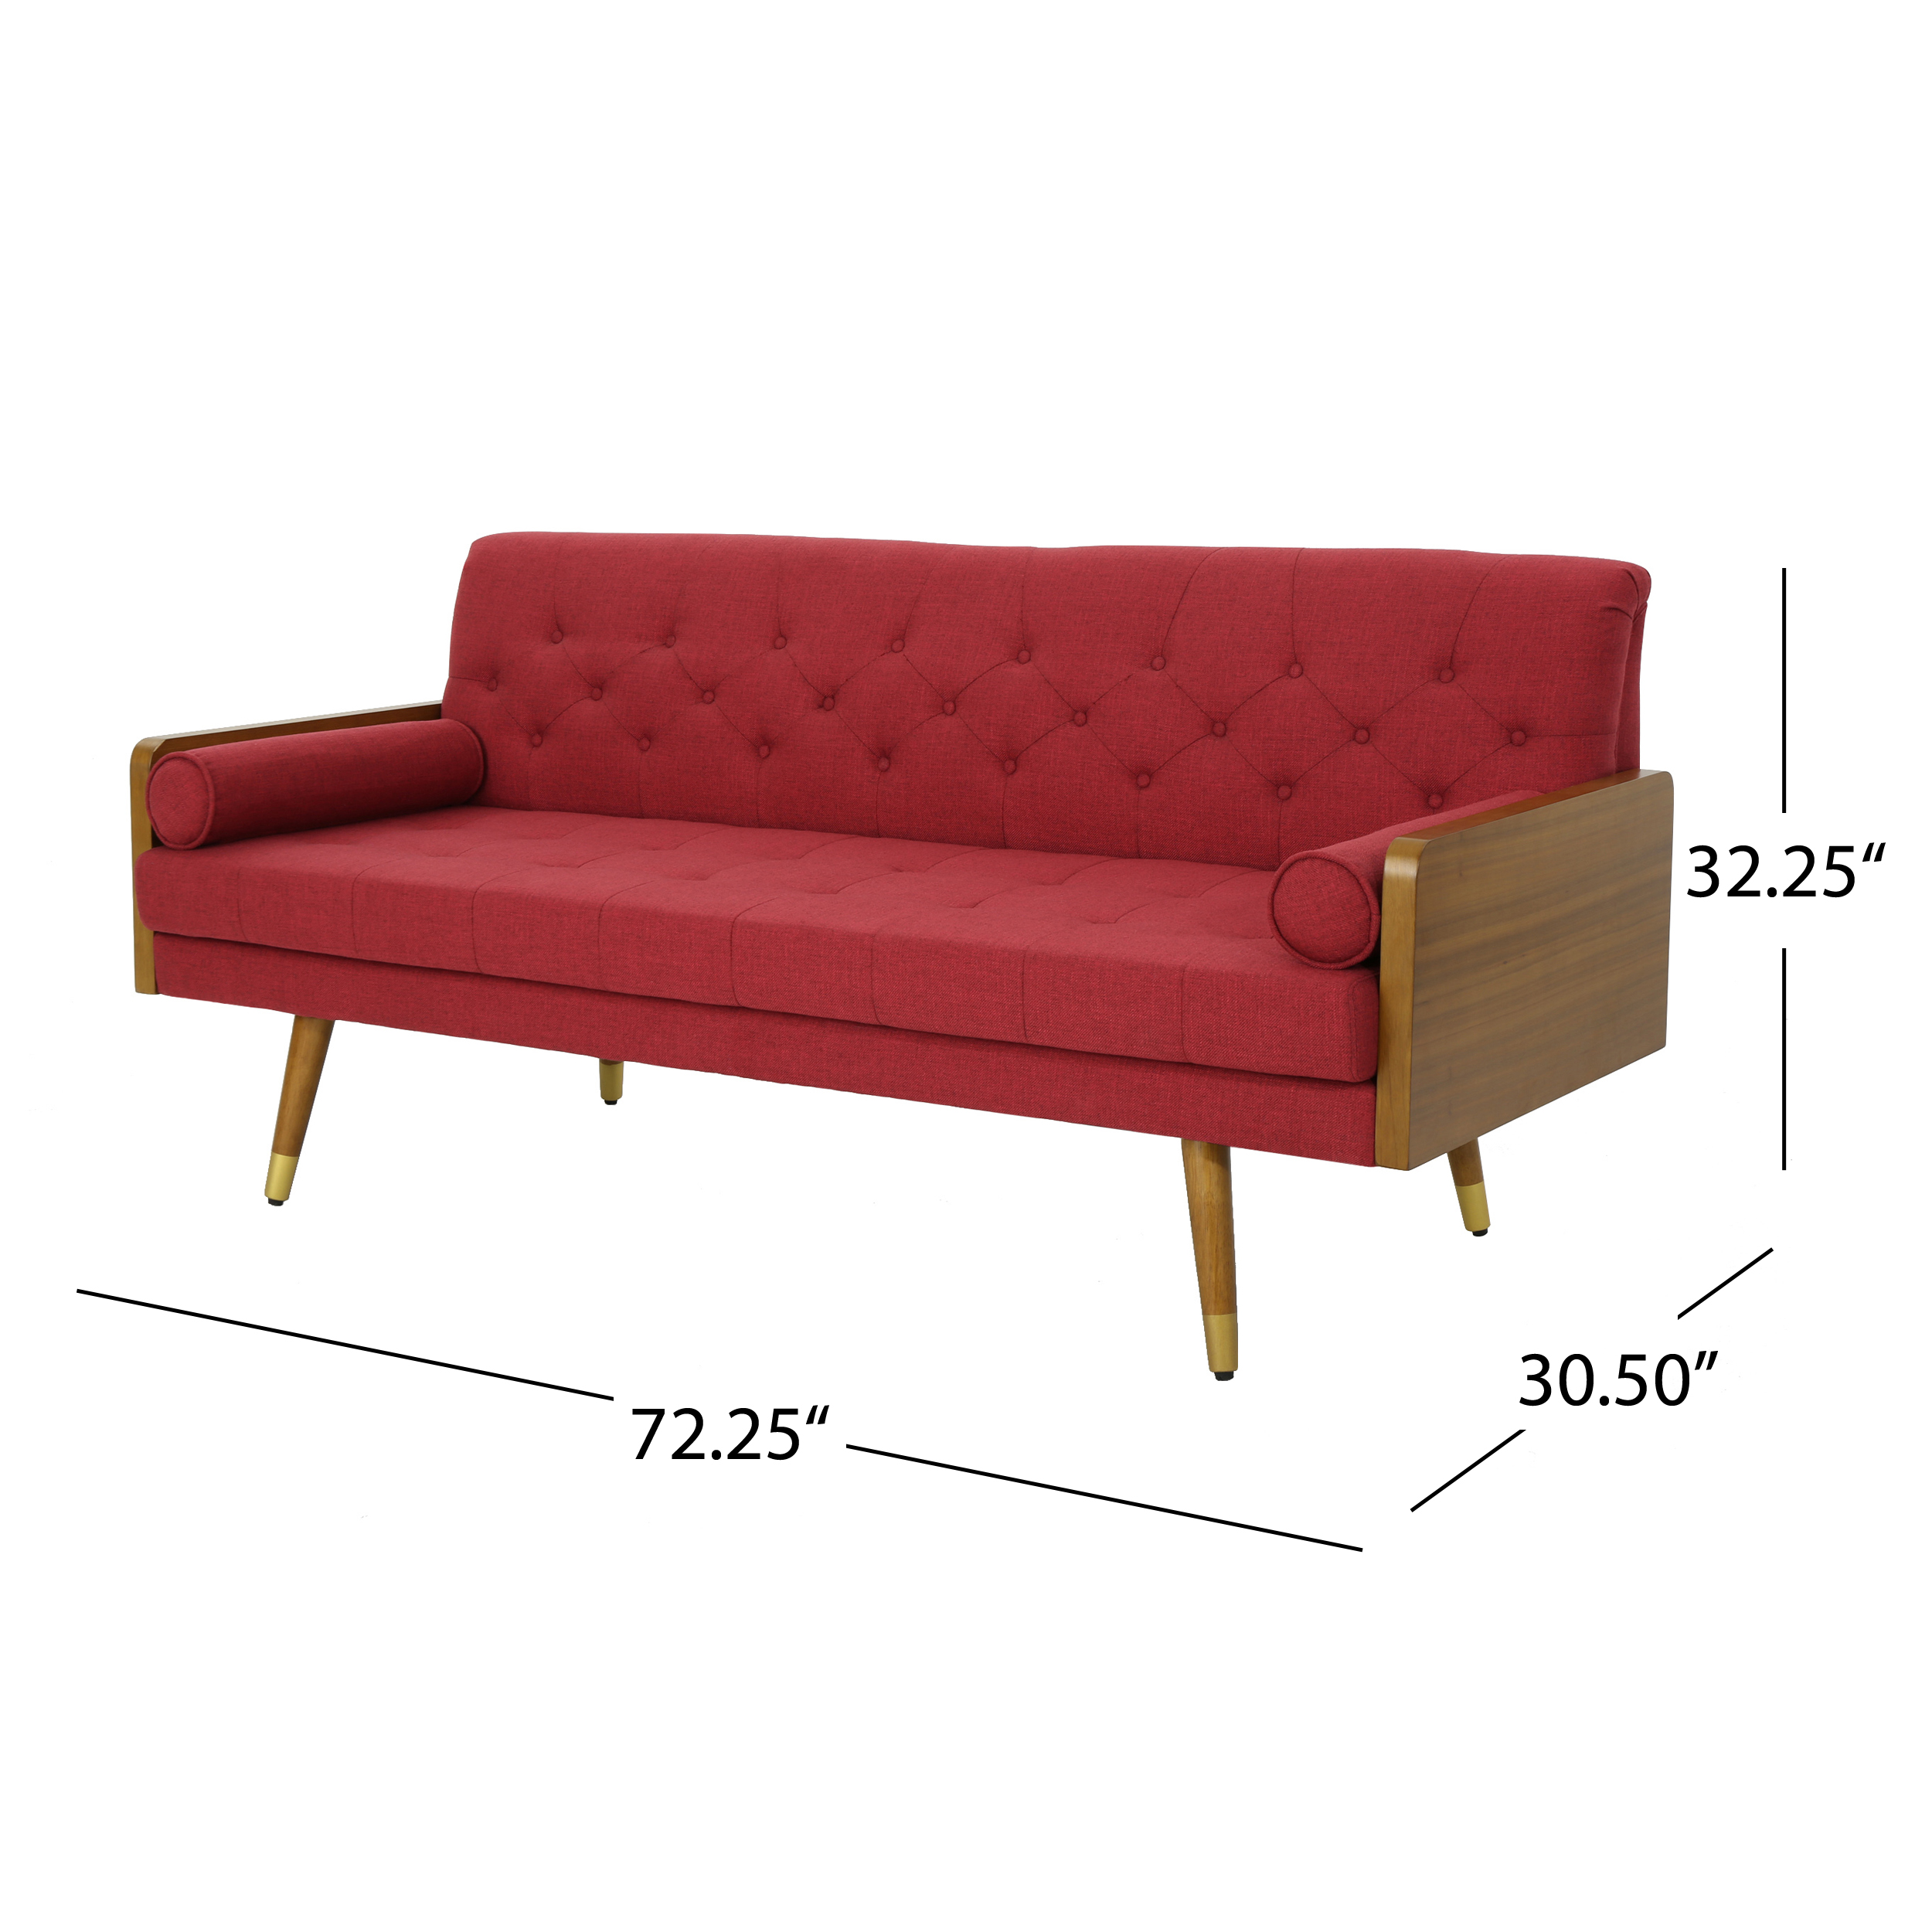 Demuir Mid Century Modern Tufted Fabric Sofa with Rolled Accent Pillows, Red - image 4 of 10